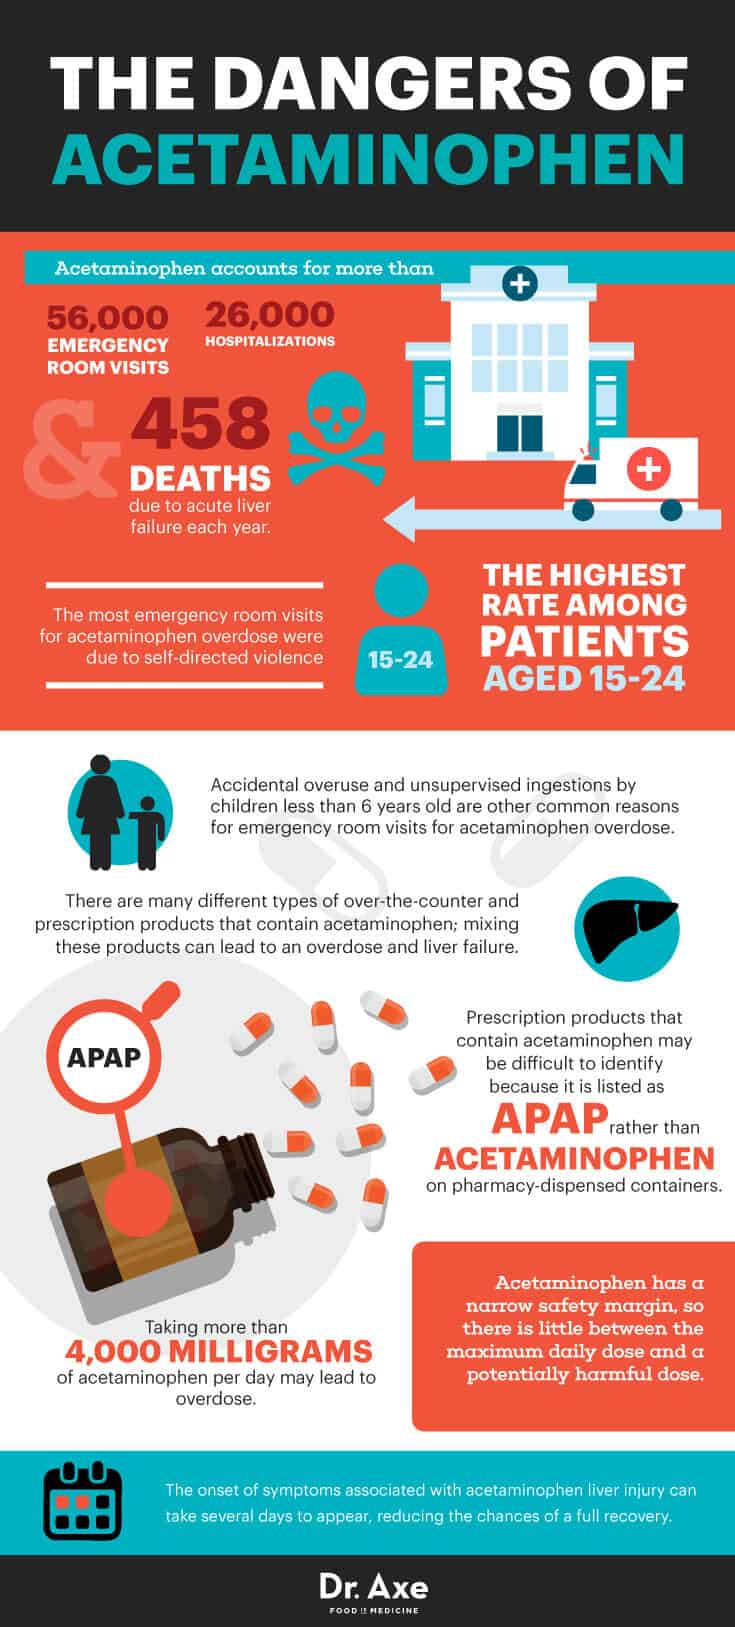 The dangers of acetaminophen overdose - Dr. Axe